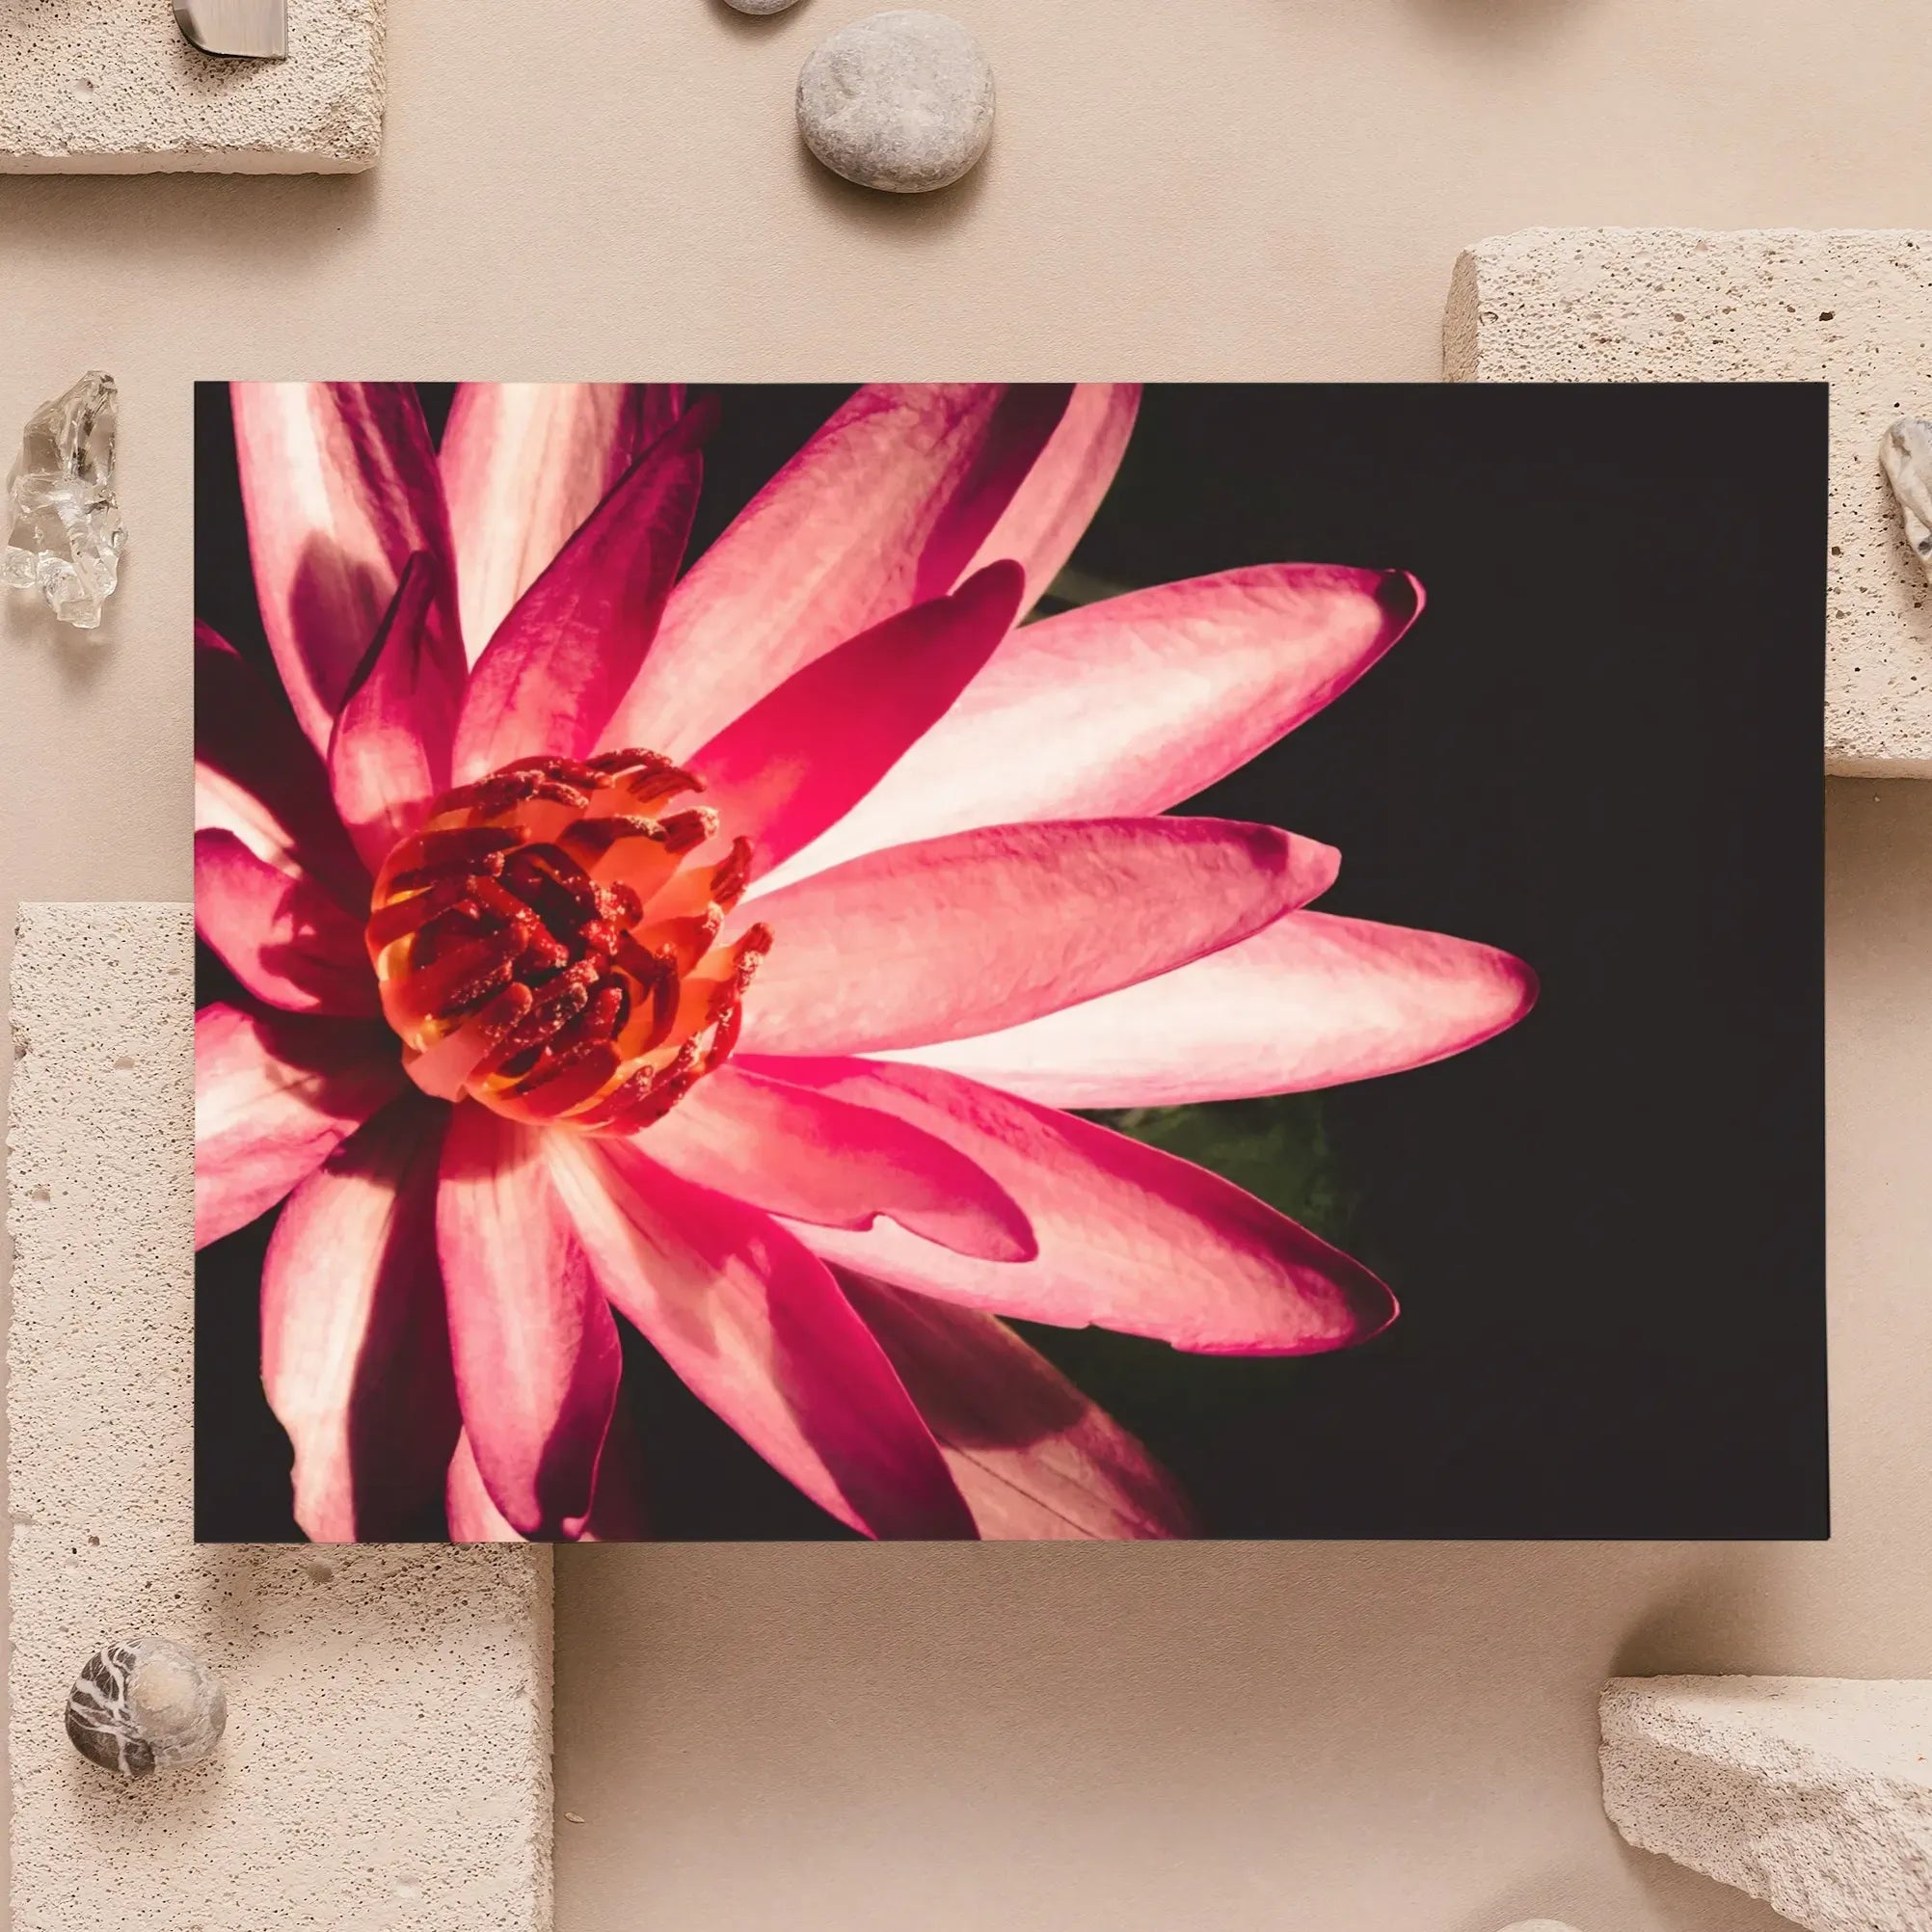 Casanova - Pink Red Lotus Flower Photography Greeting Card - Greeting & Note Cards - Aesthetic Art